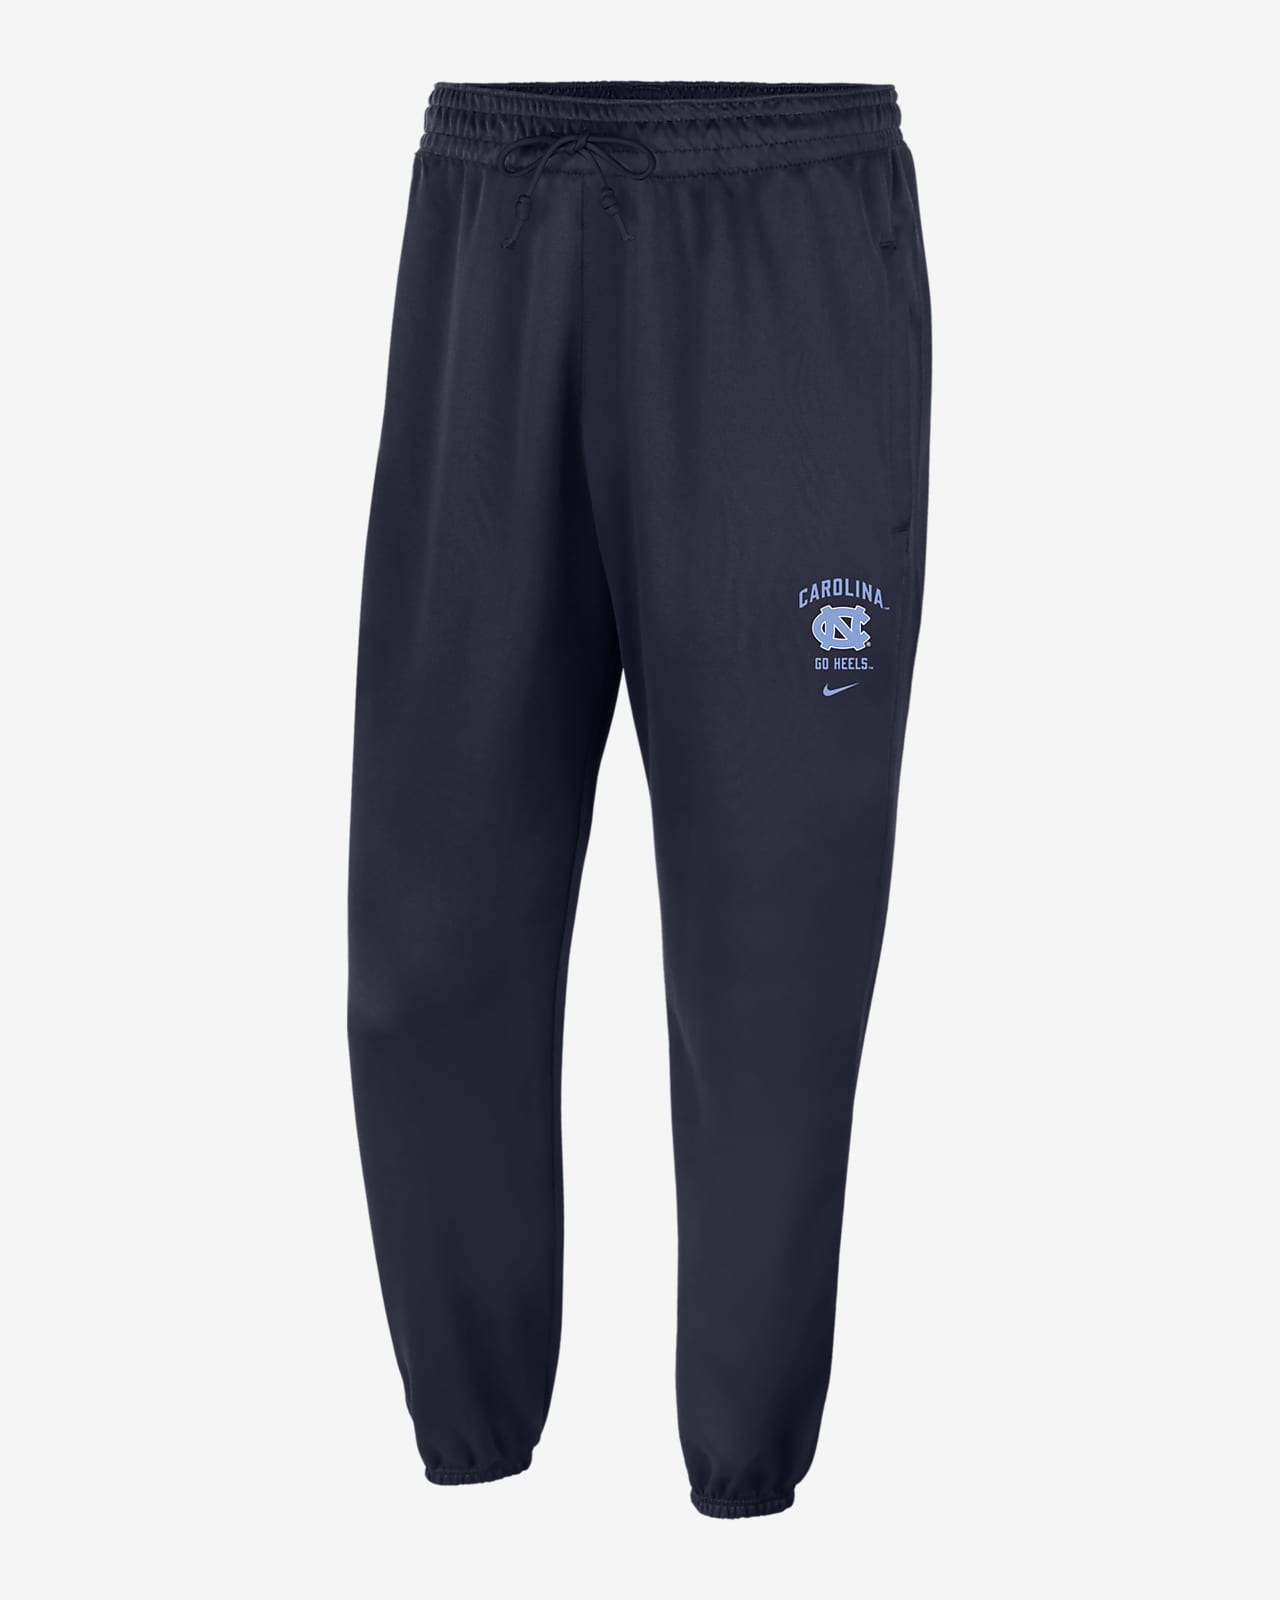 UNC Standard Issue Men's Nike College Joggers